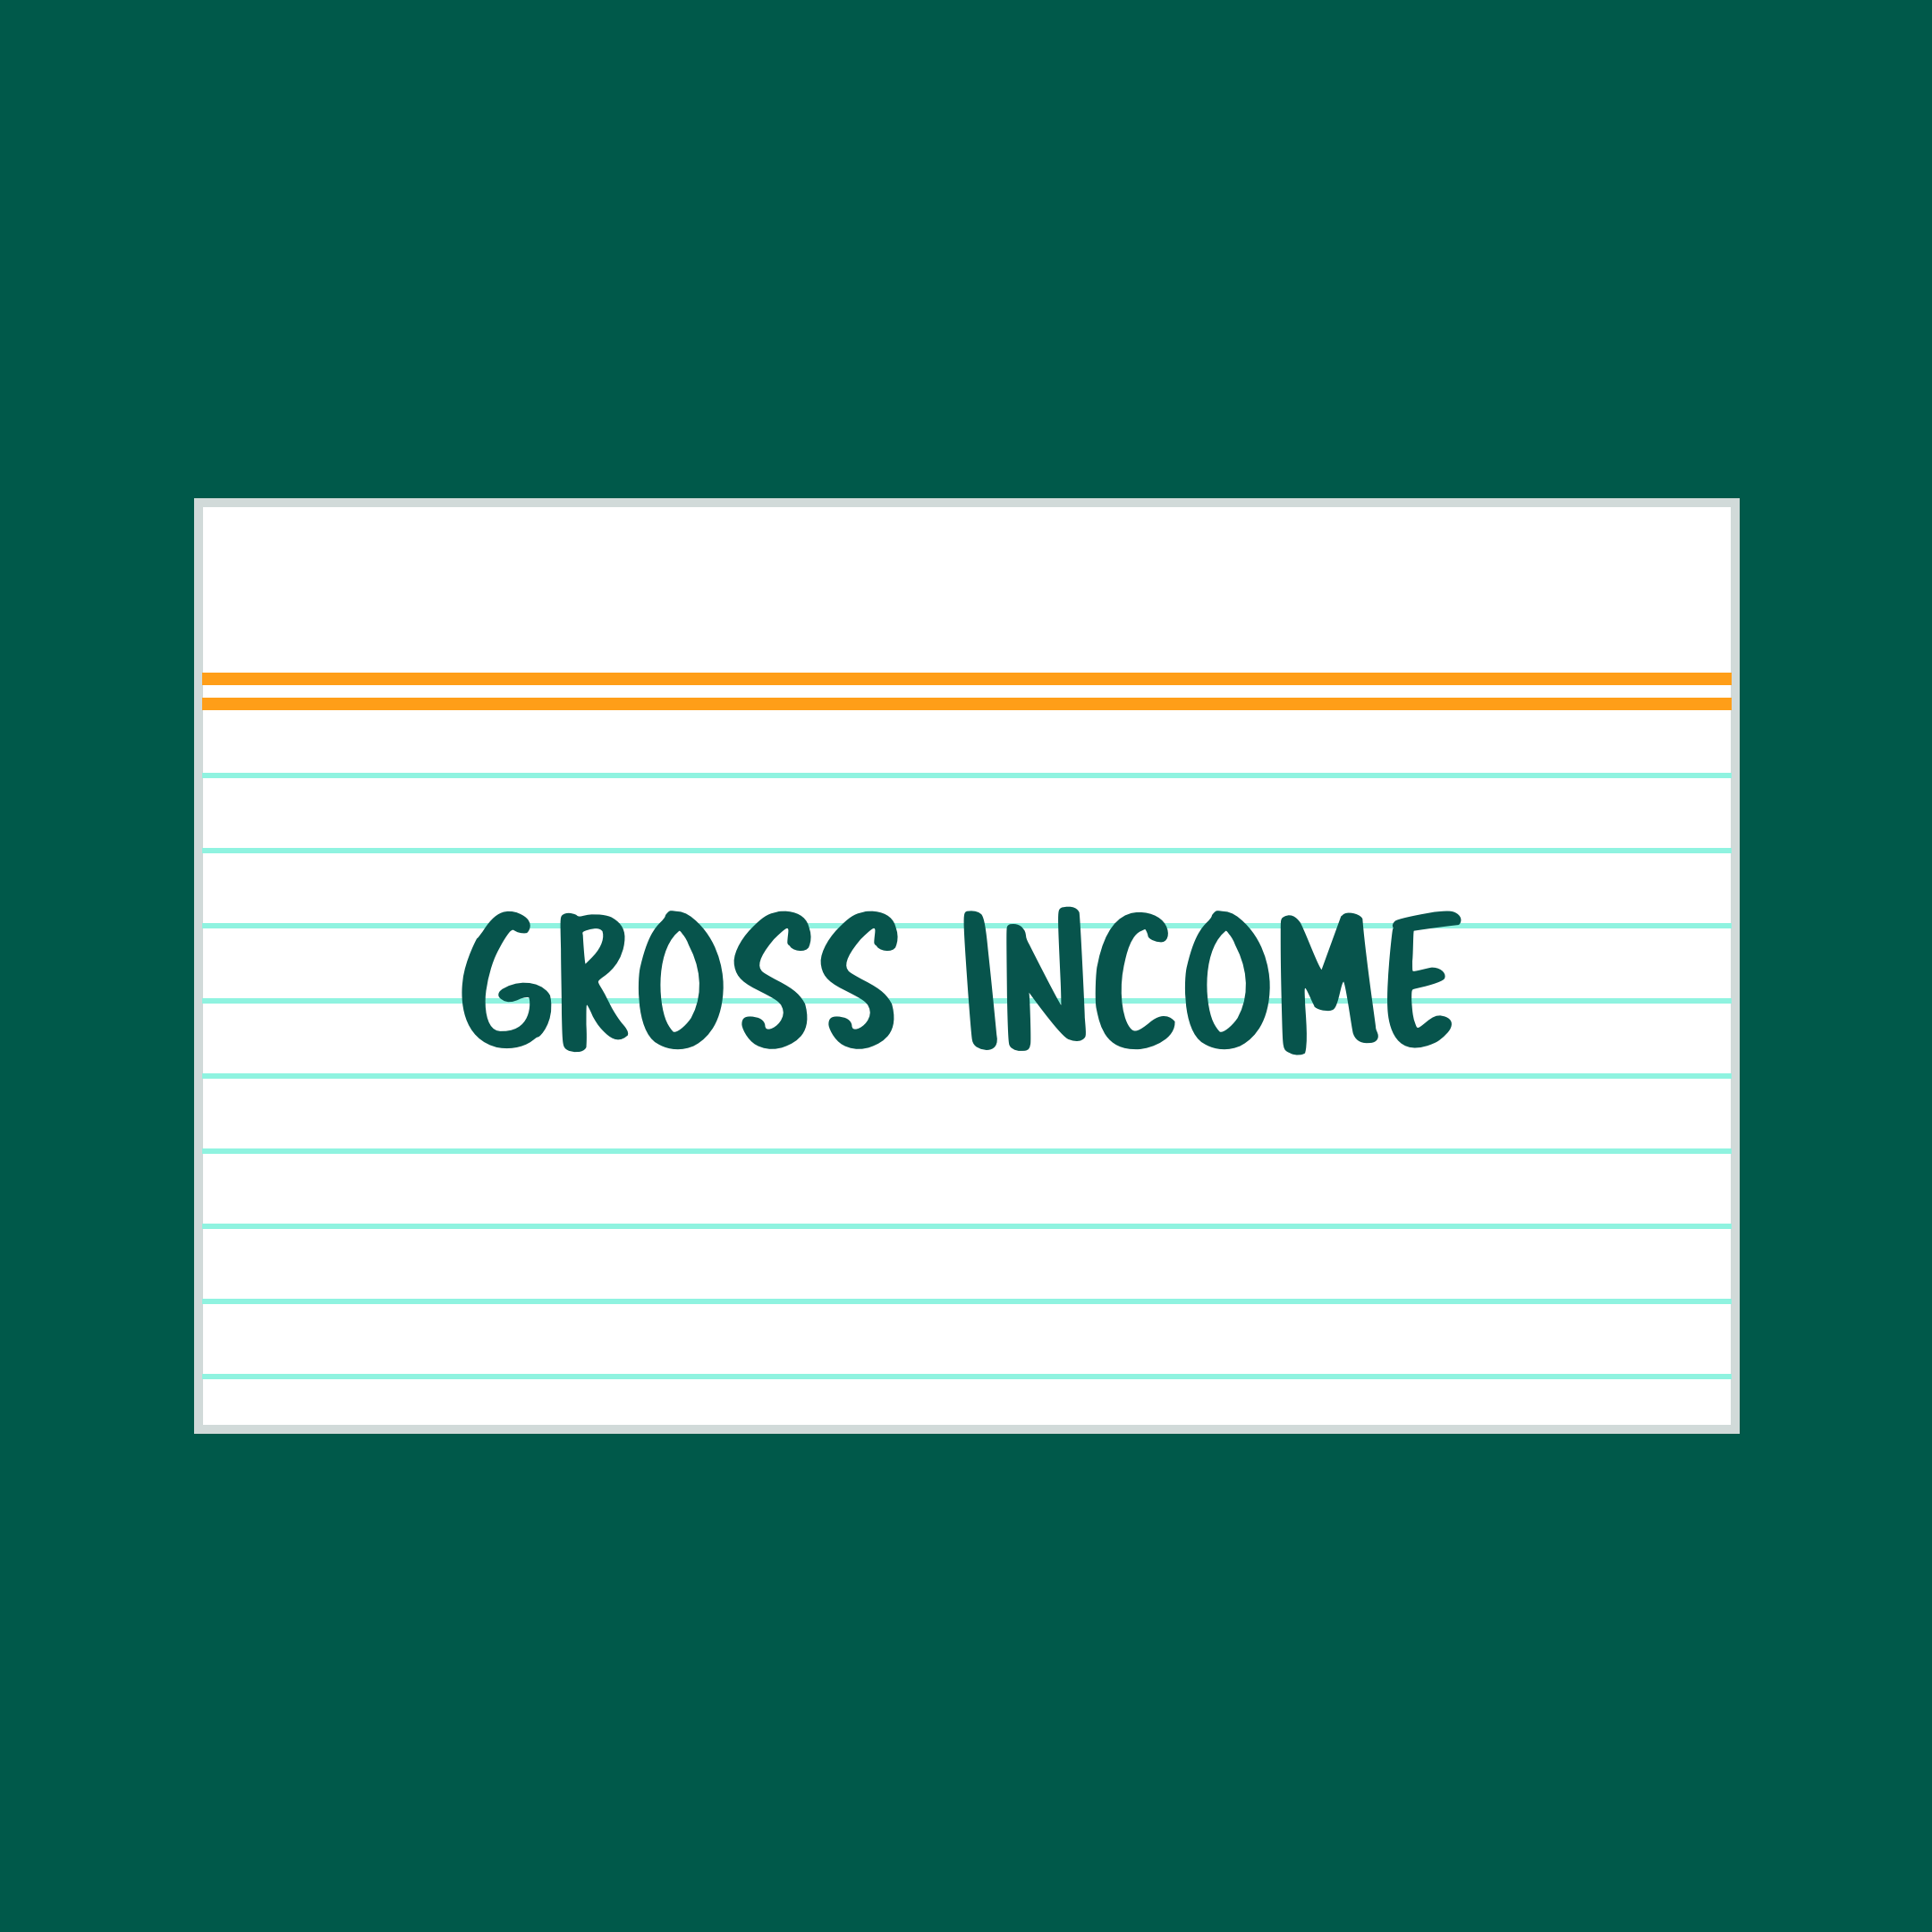 Gross income index card